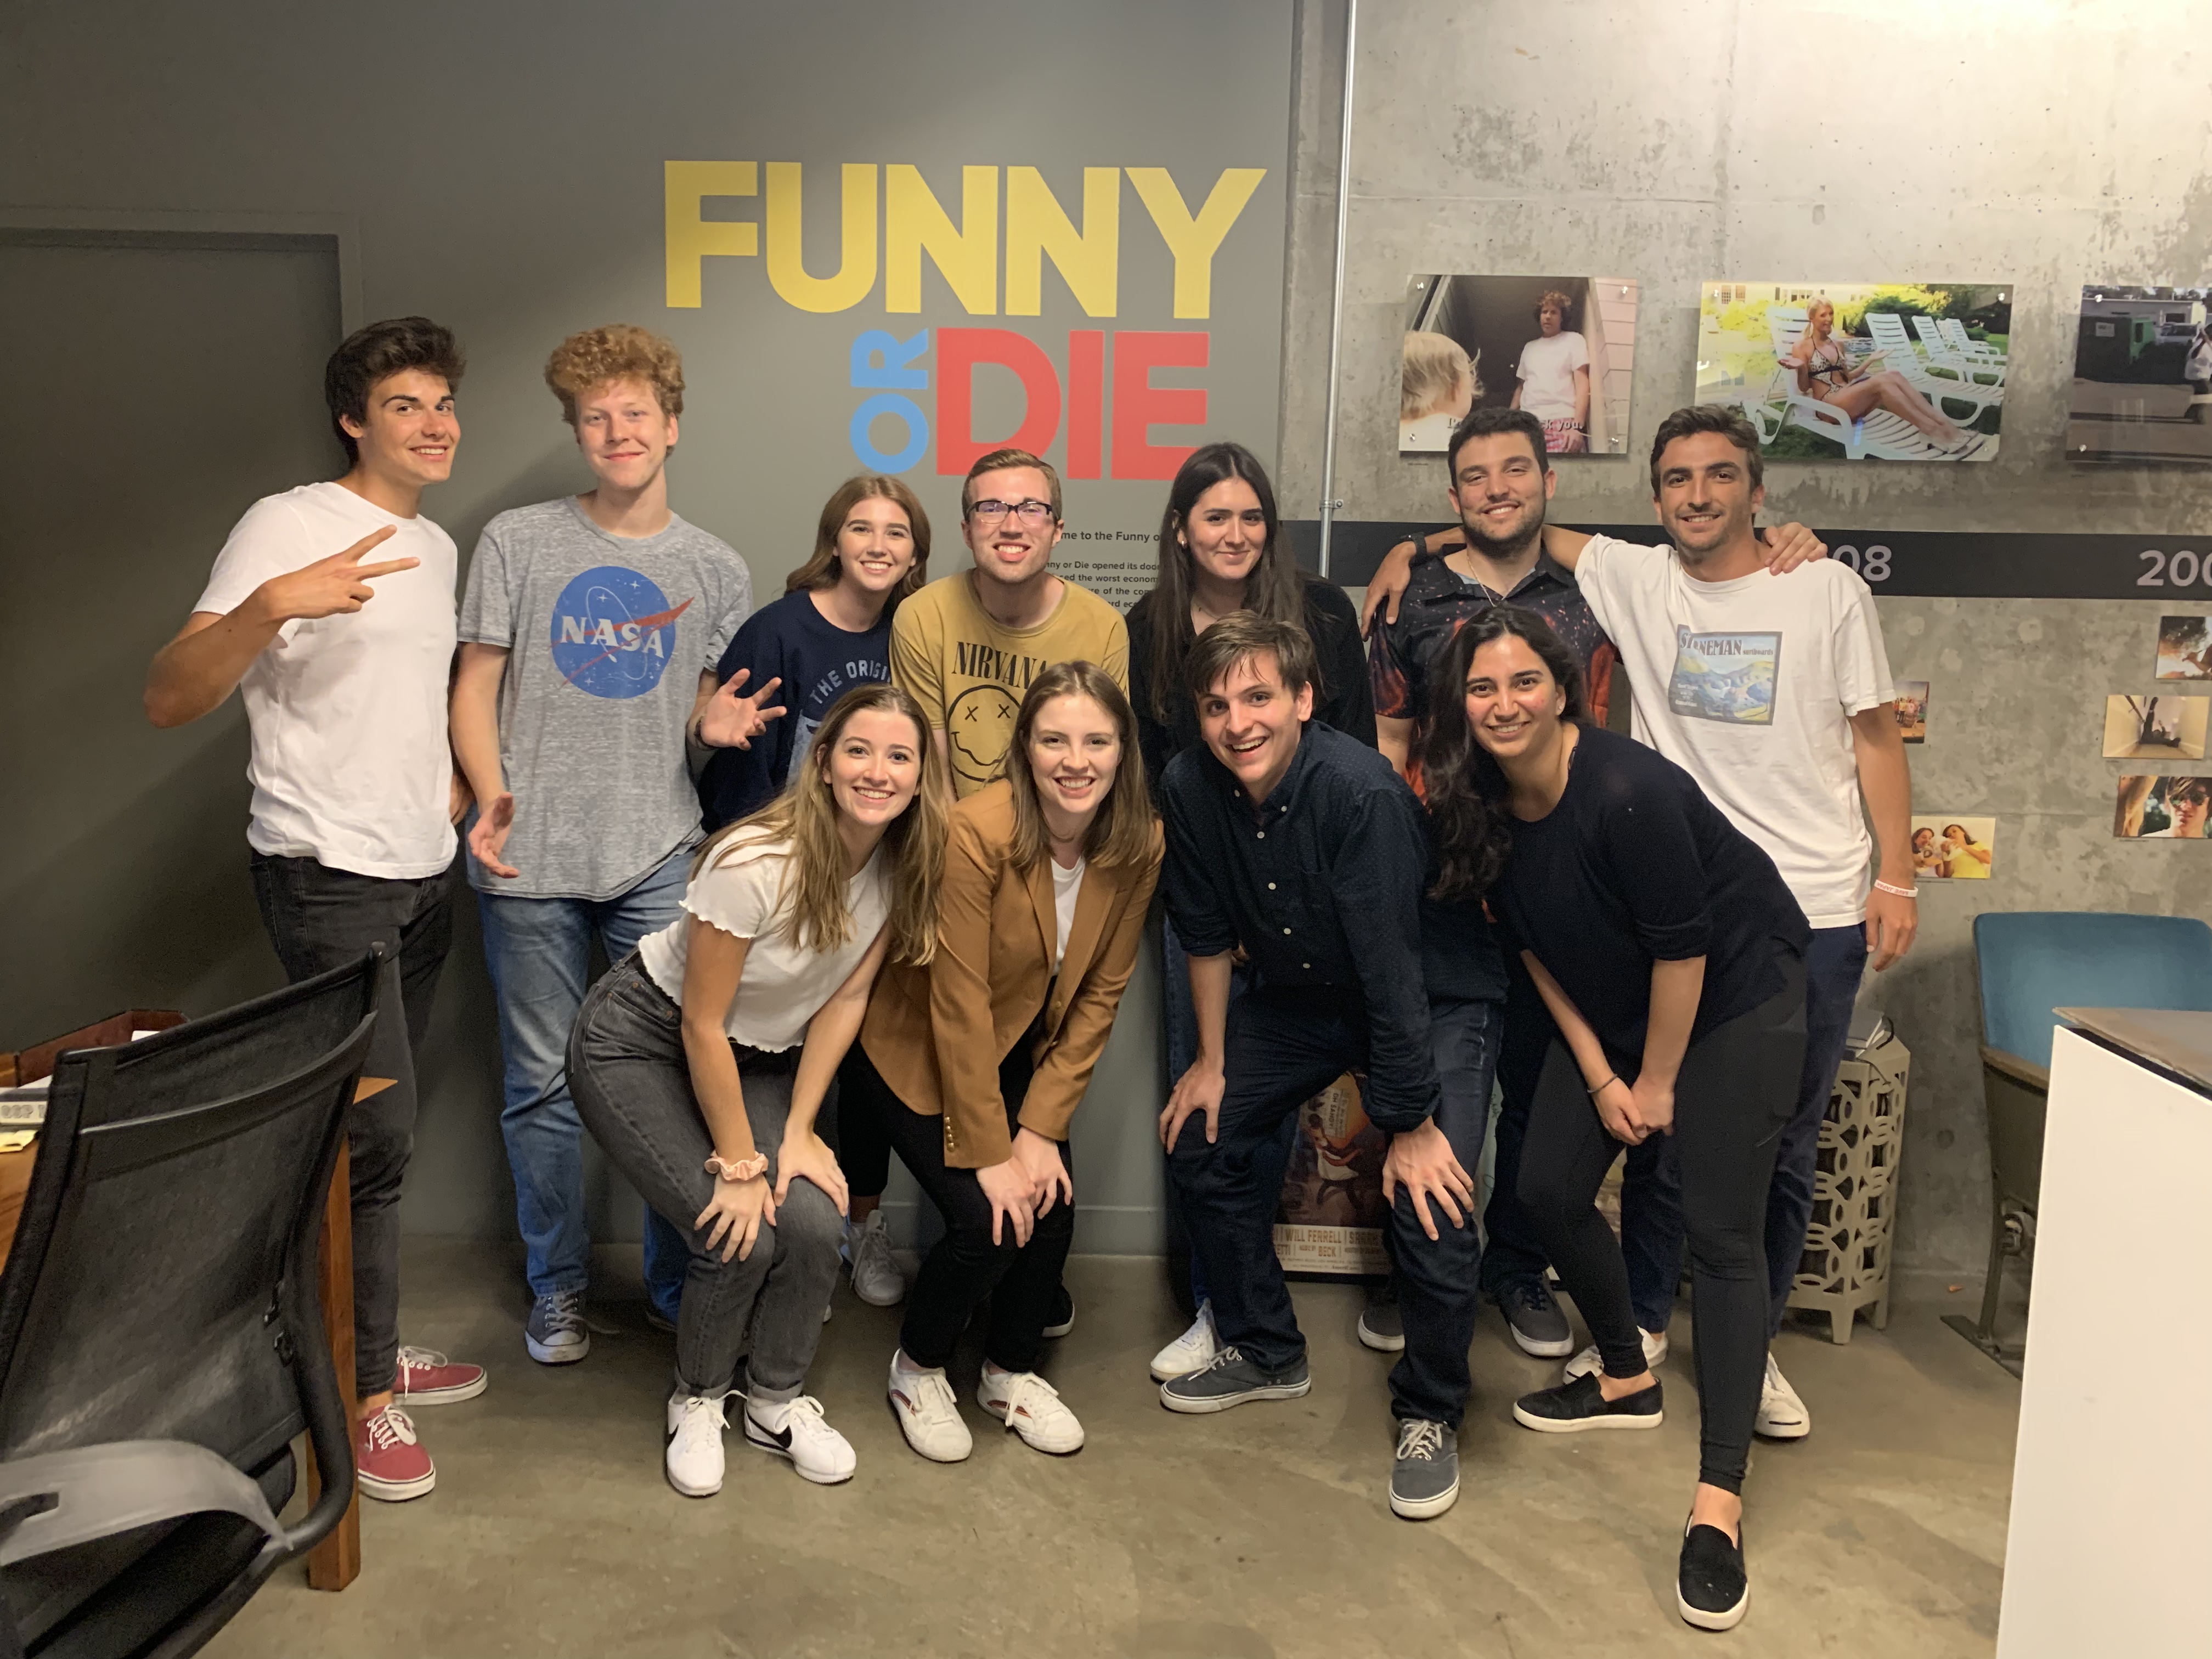 Paul Bukowsky (far left in white t-shirt) and fellow Funny or Die interns mug for the camera. Courtesy photo.